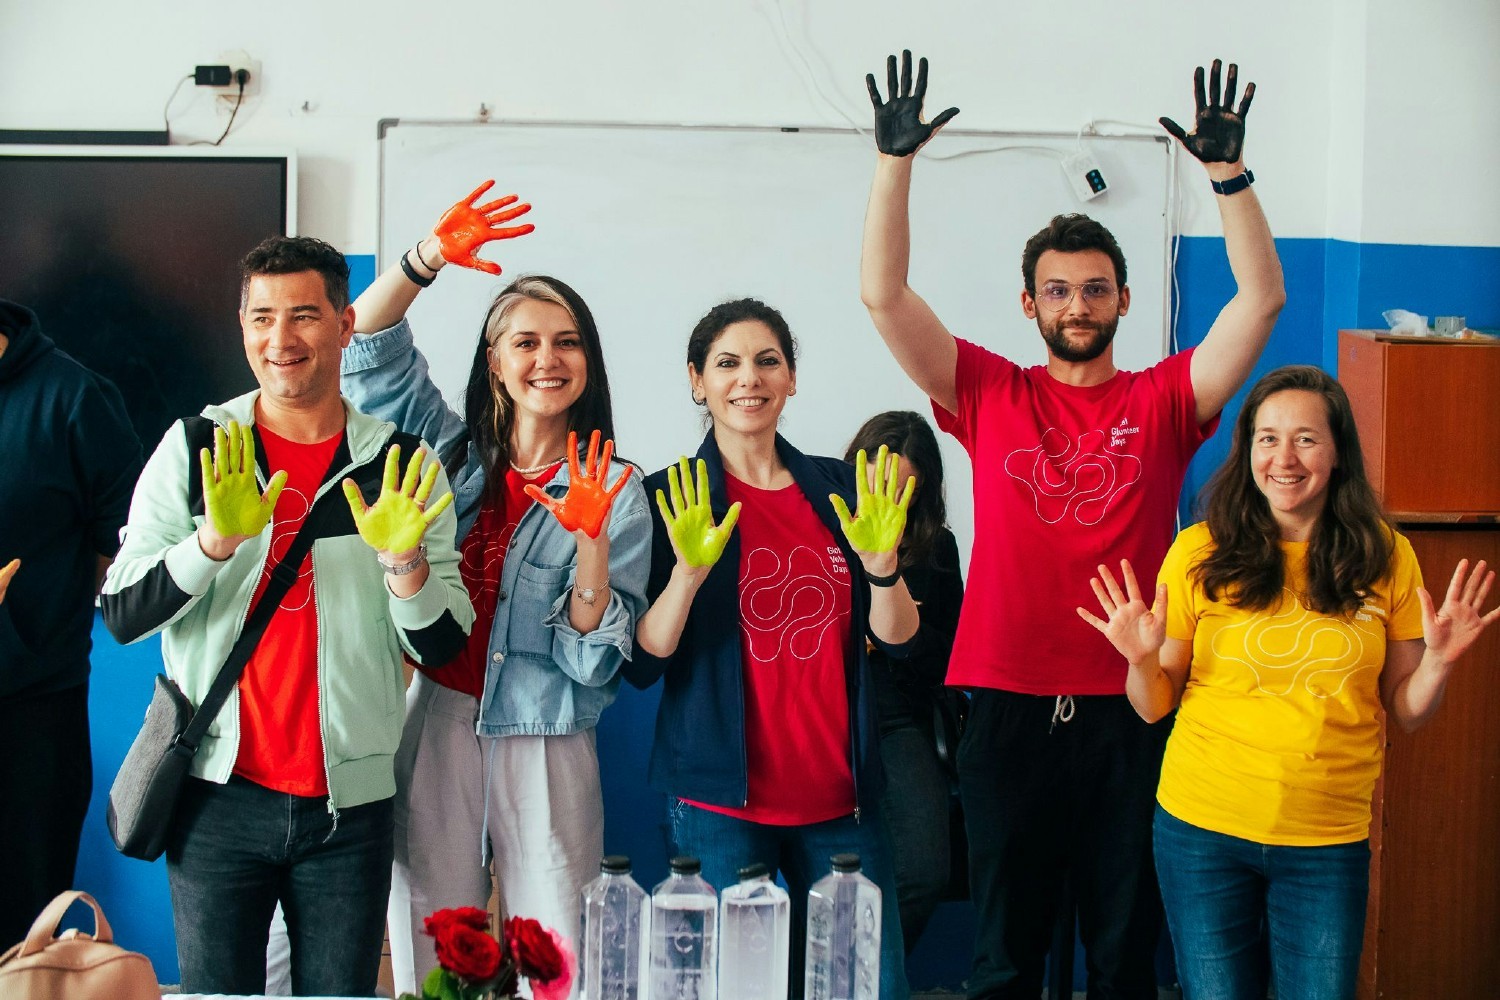 Morningstar employees in Romania volunteering at Teach for Romania during our Global Week of Giving.